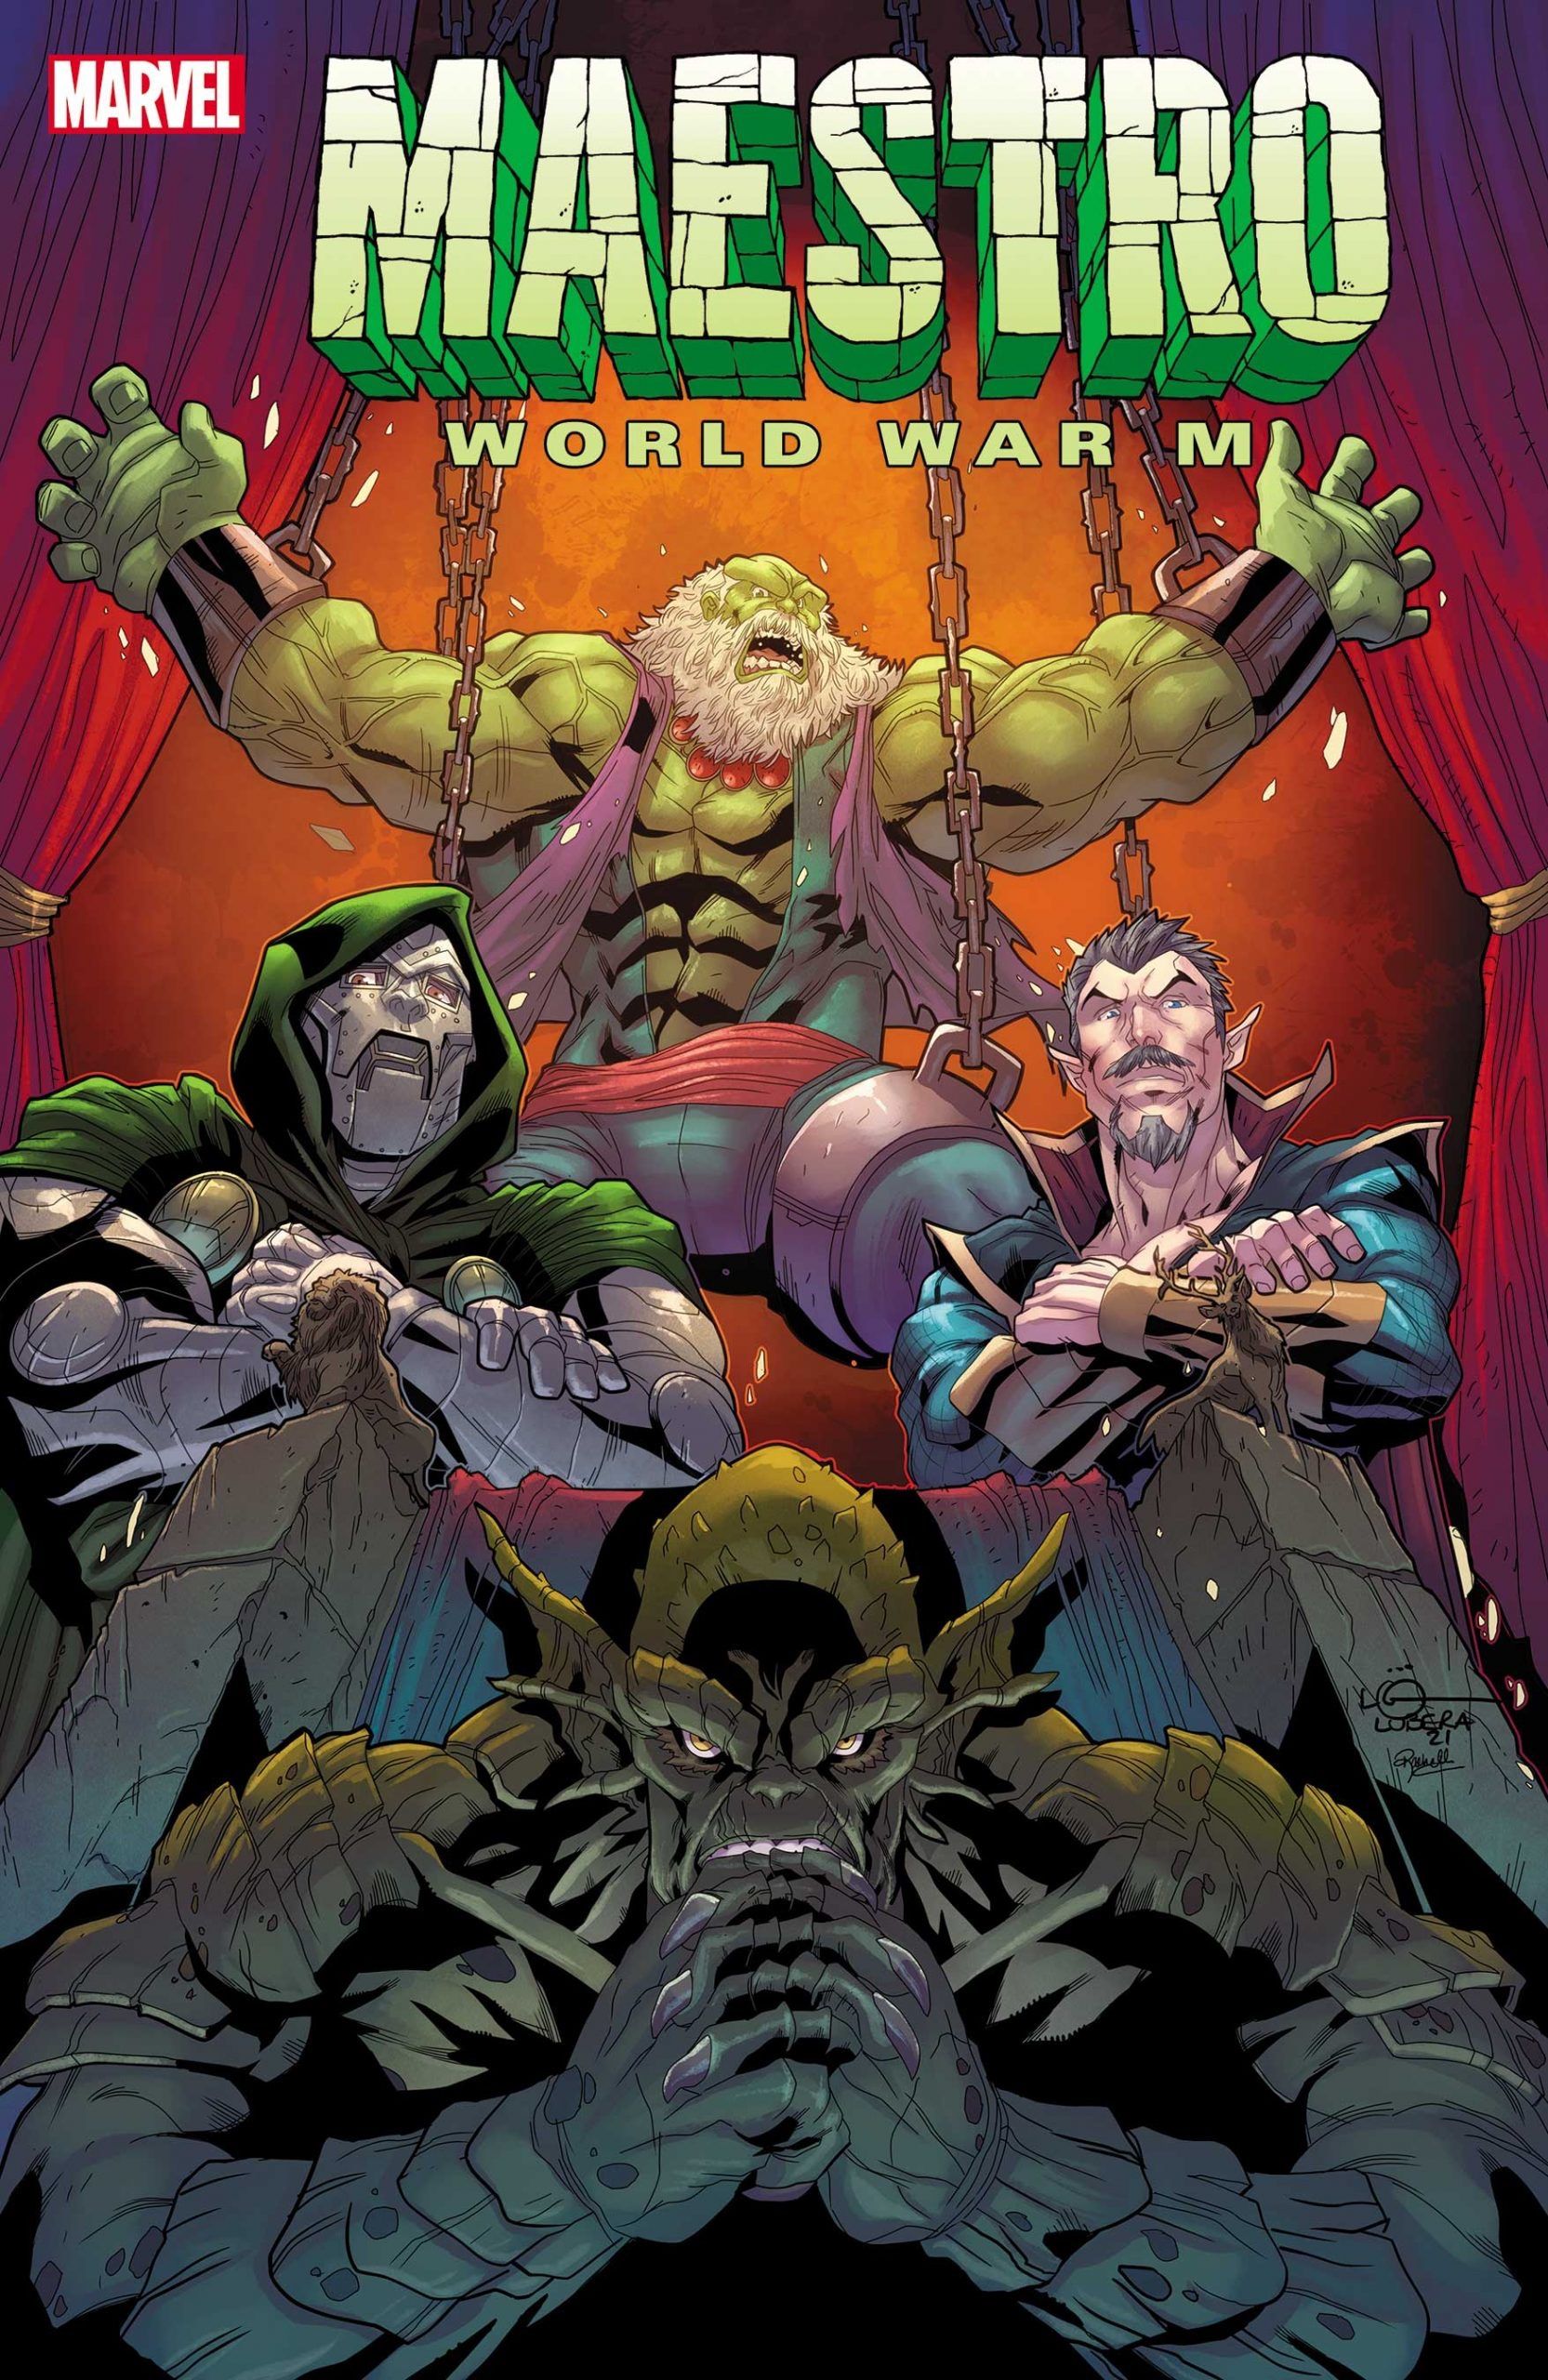 Maestro chained up with Doctor Doom, Namor and Abomination in front of him